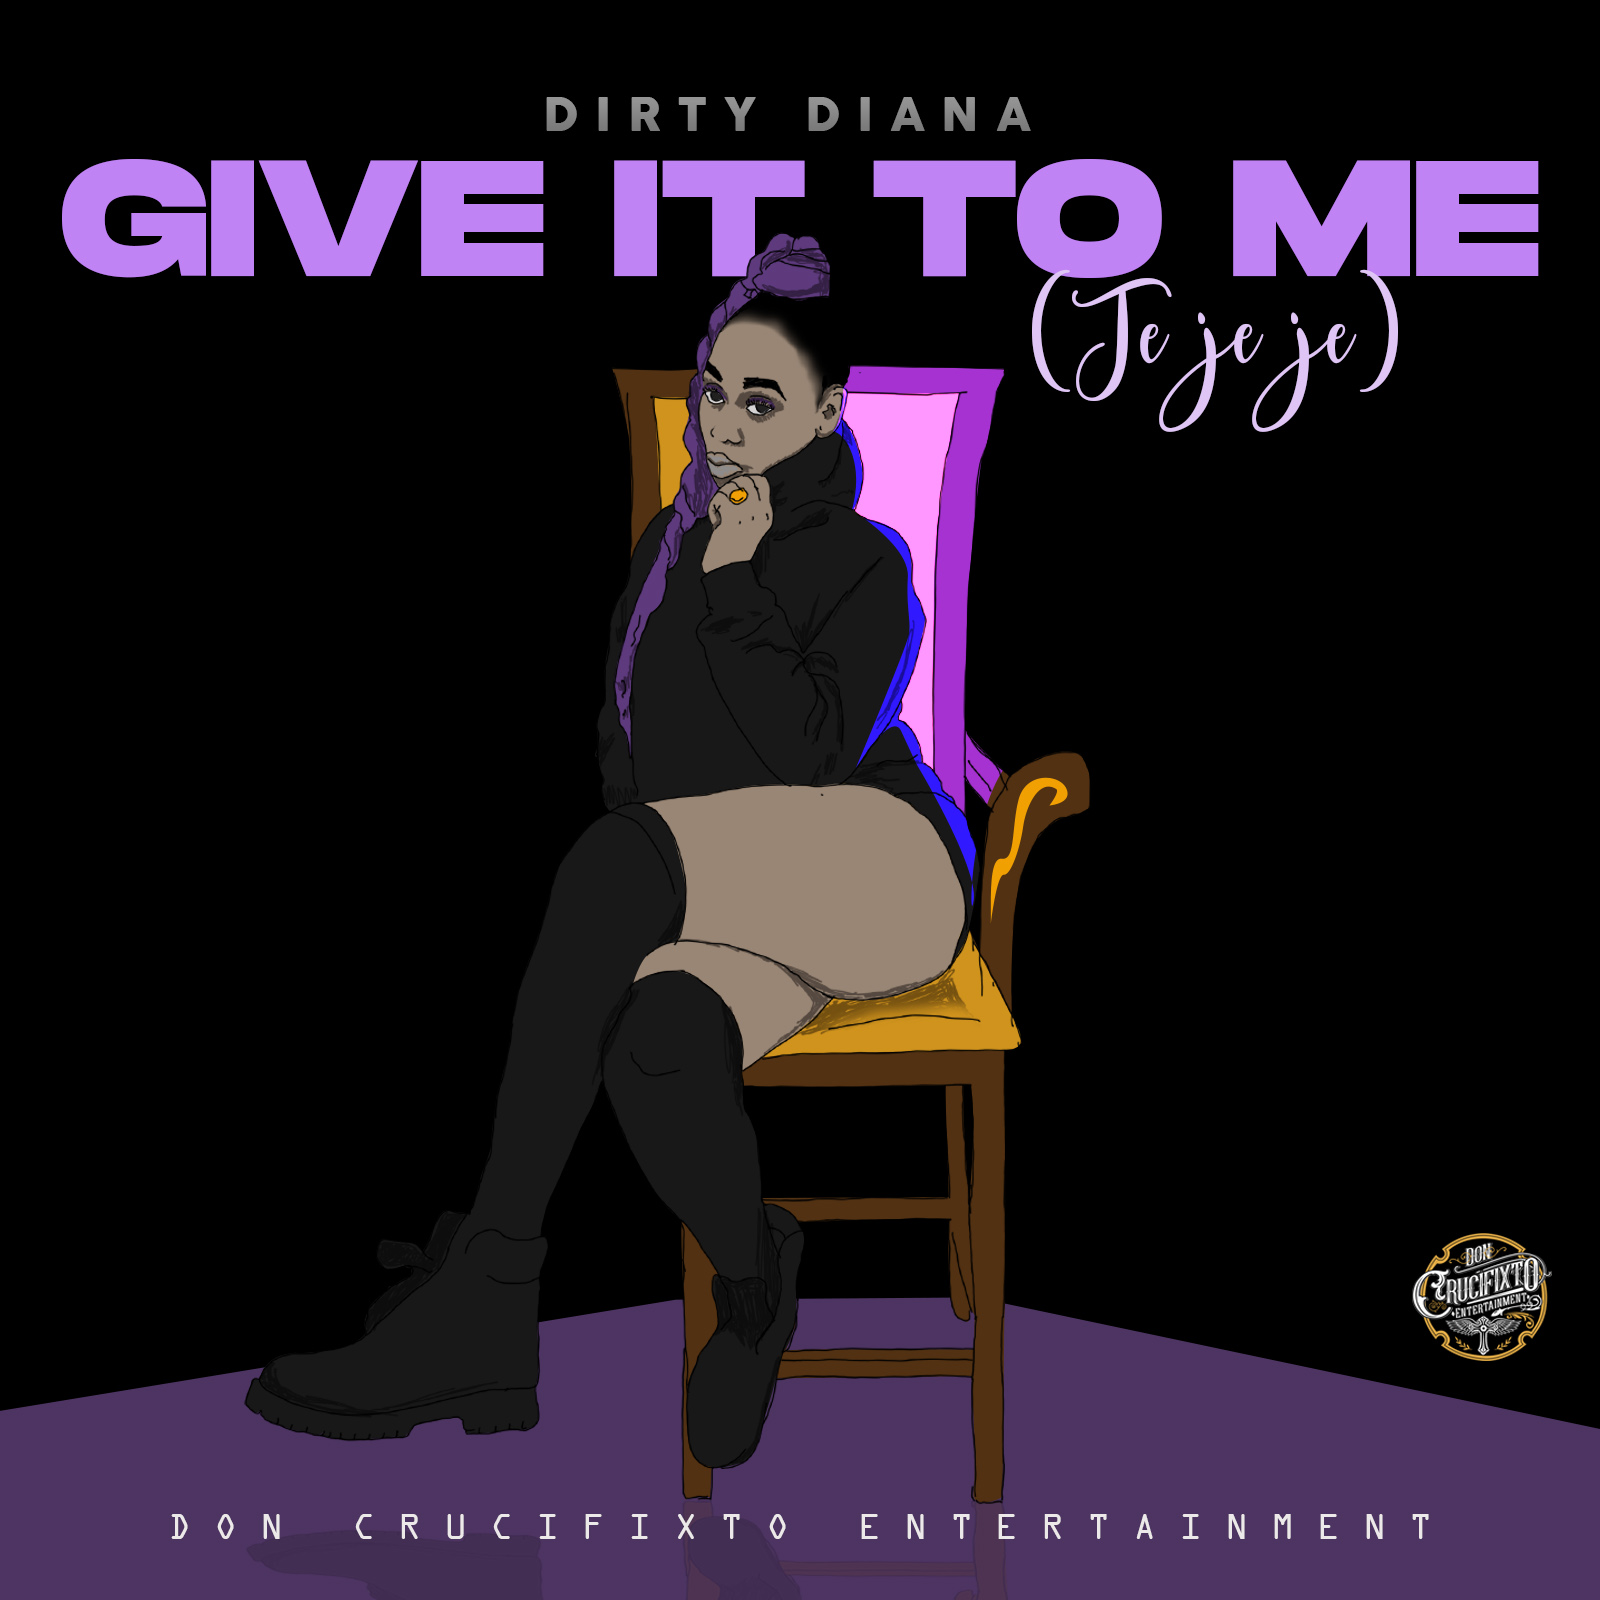 Don Crucifixto’s first female act, Dirty Diana premieres new single titled ‘Give Give It To Me -Je Je Je’